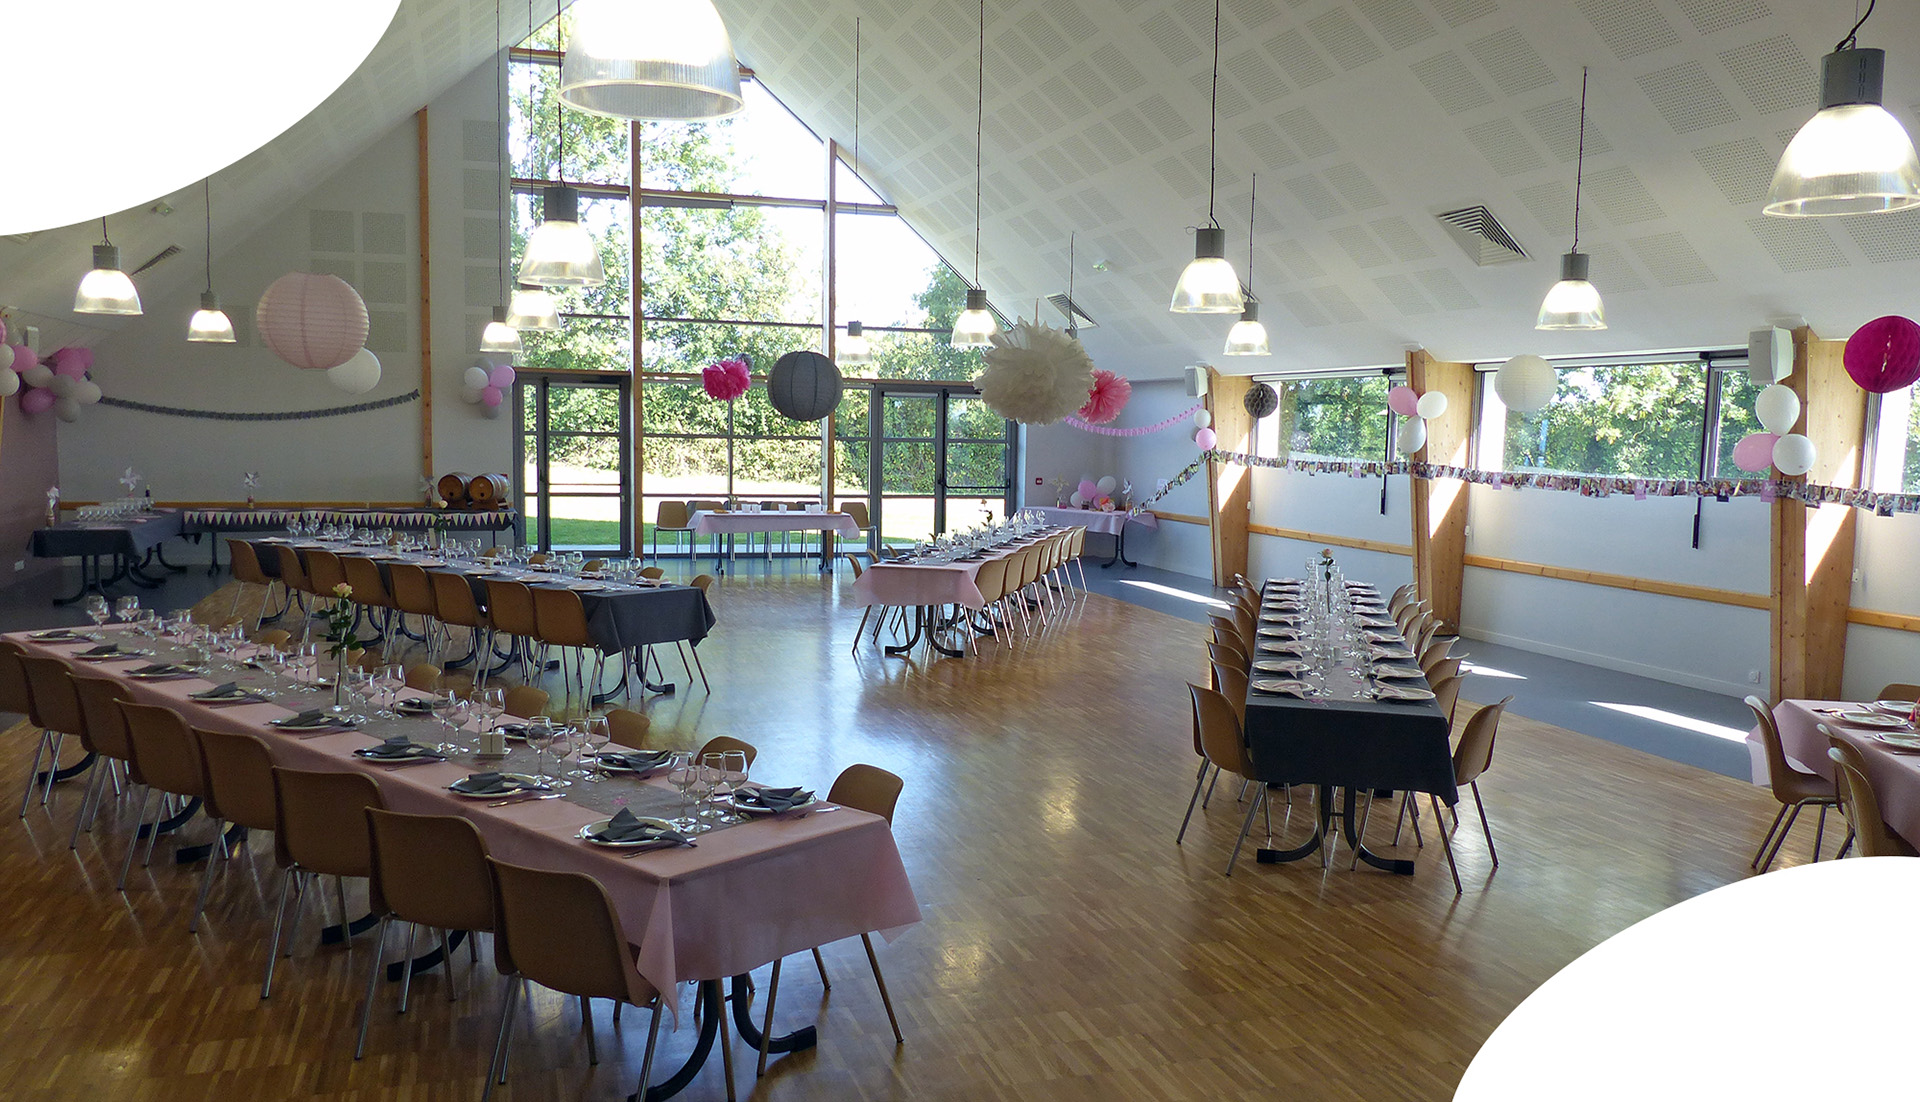 location-salle-reception-mariage-anniversaire-soiree-fetes-isigny-osmanville-calvados-manche-vaisselle-table